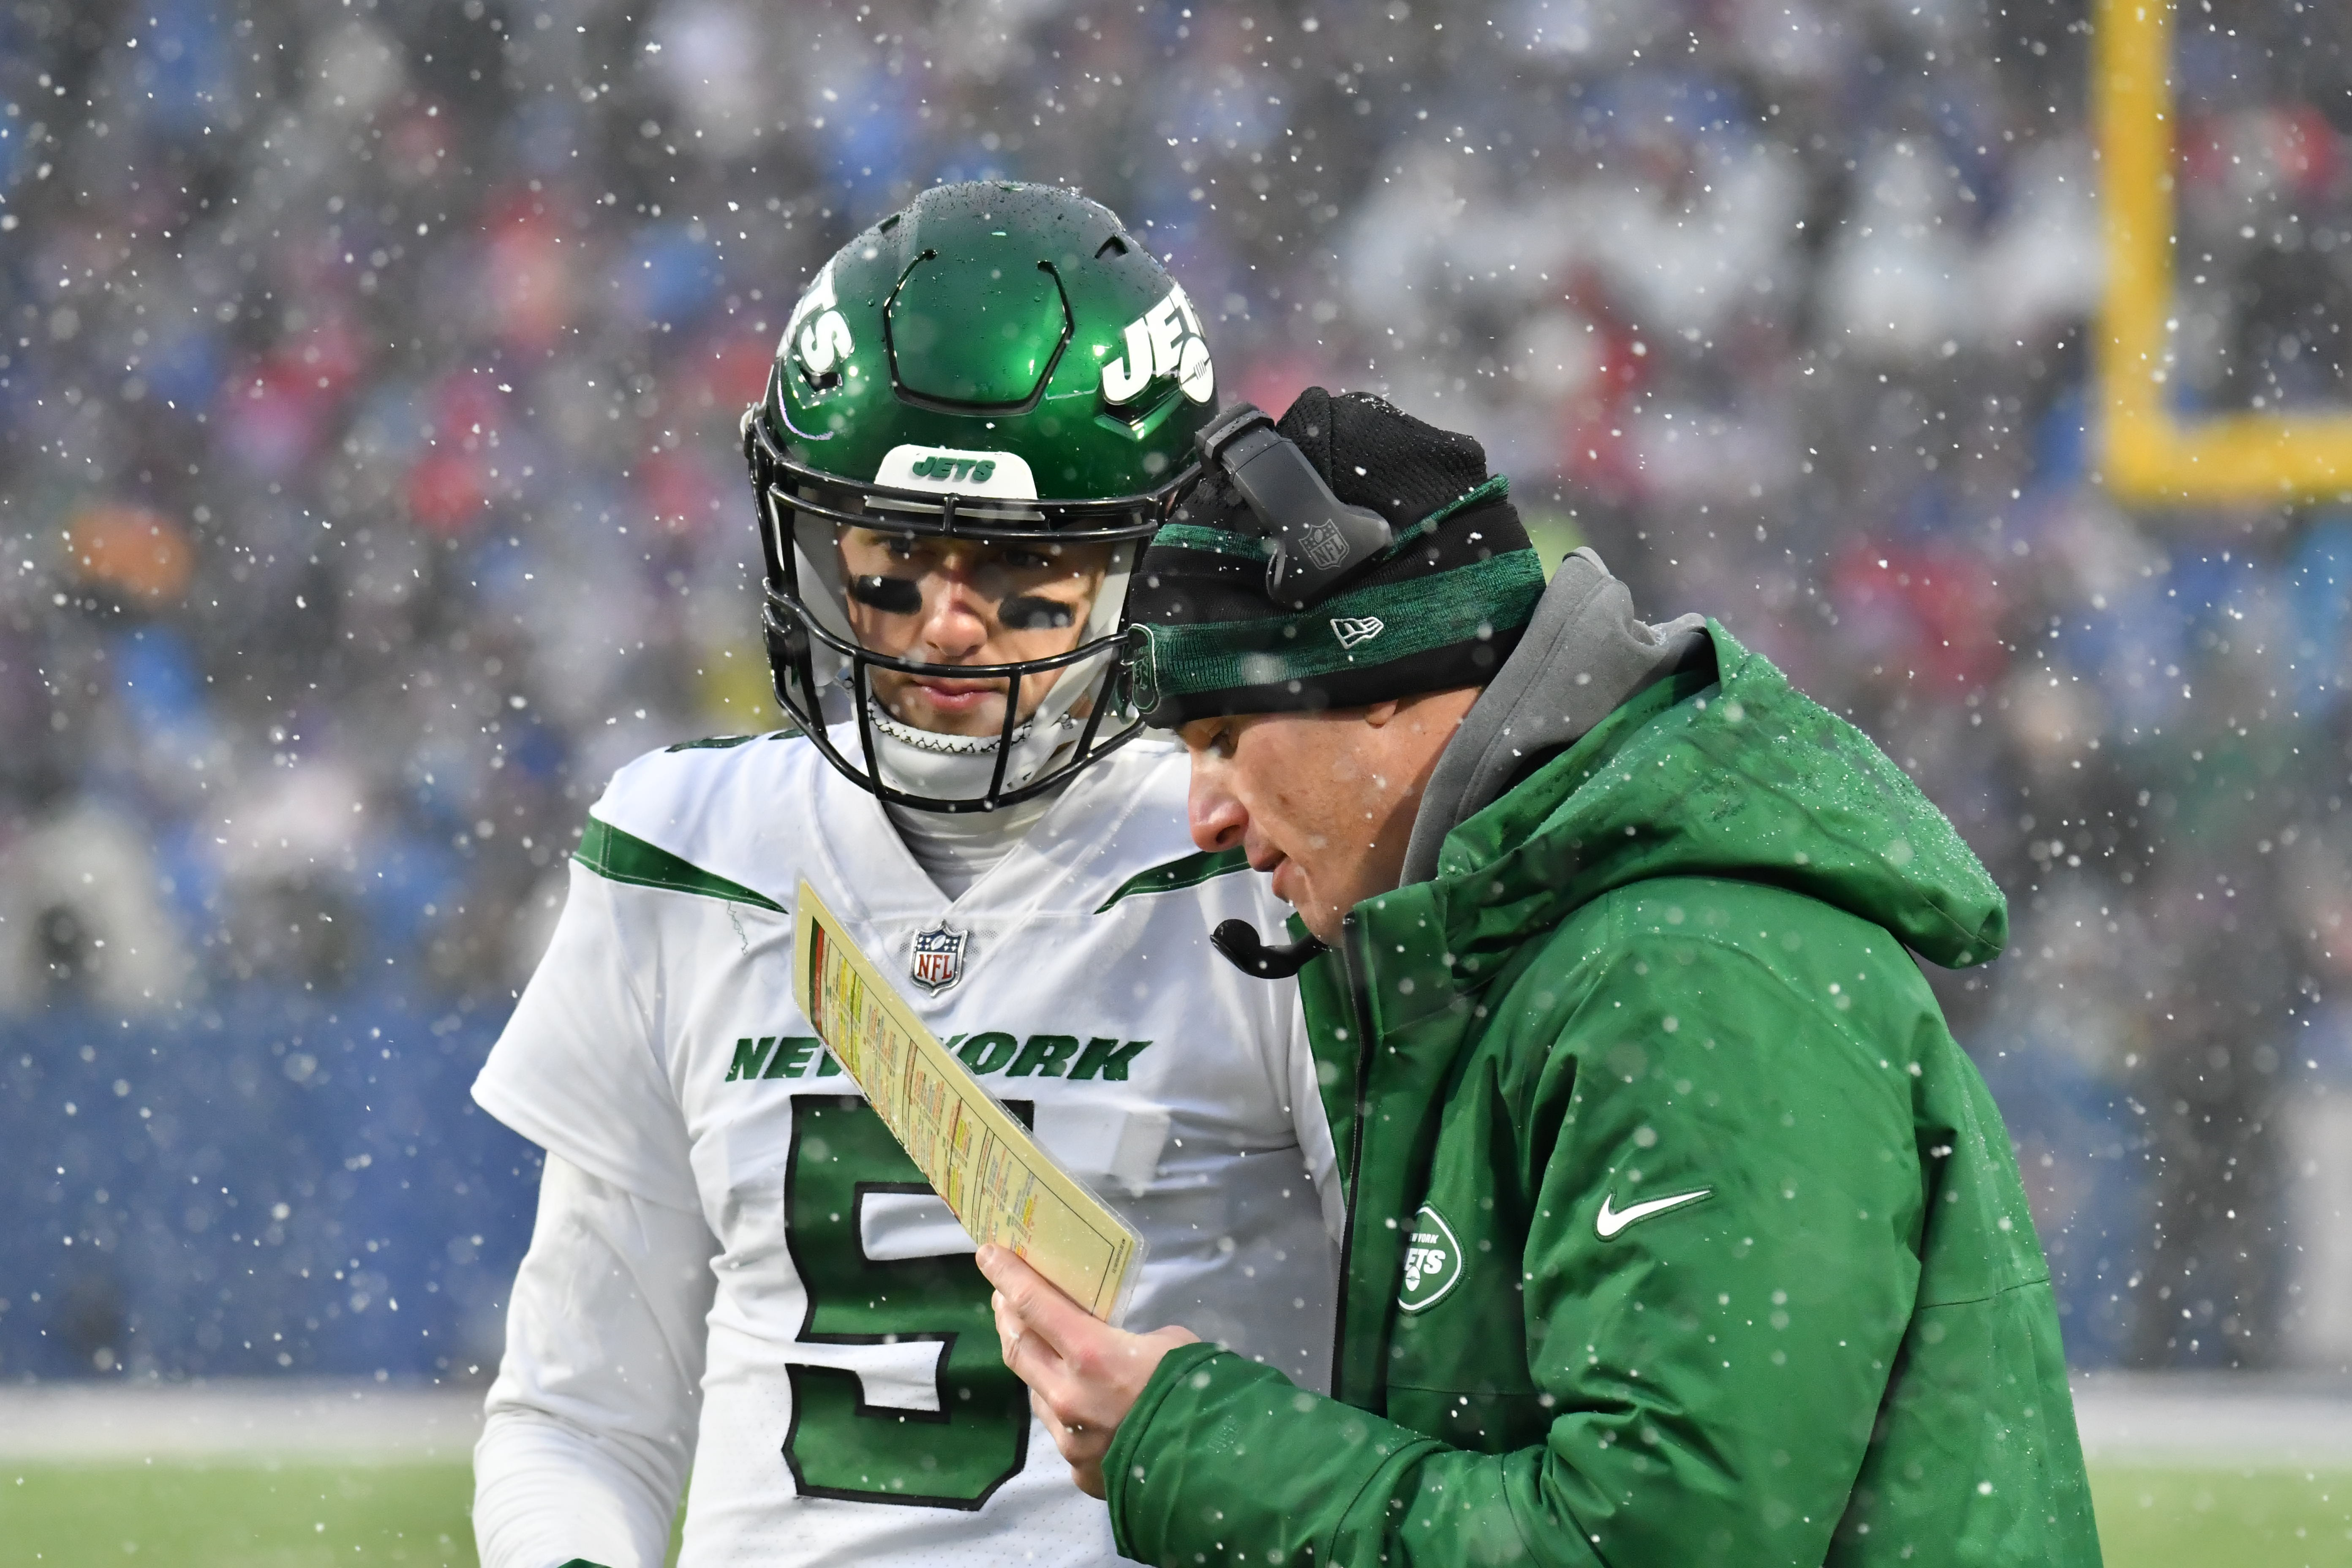 Jets Mike LaFleur Has 'Inside Track' To Be Hired As Rams Offensive Coordinator